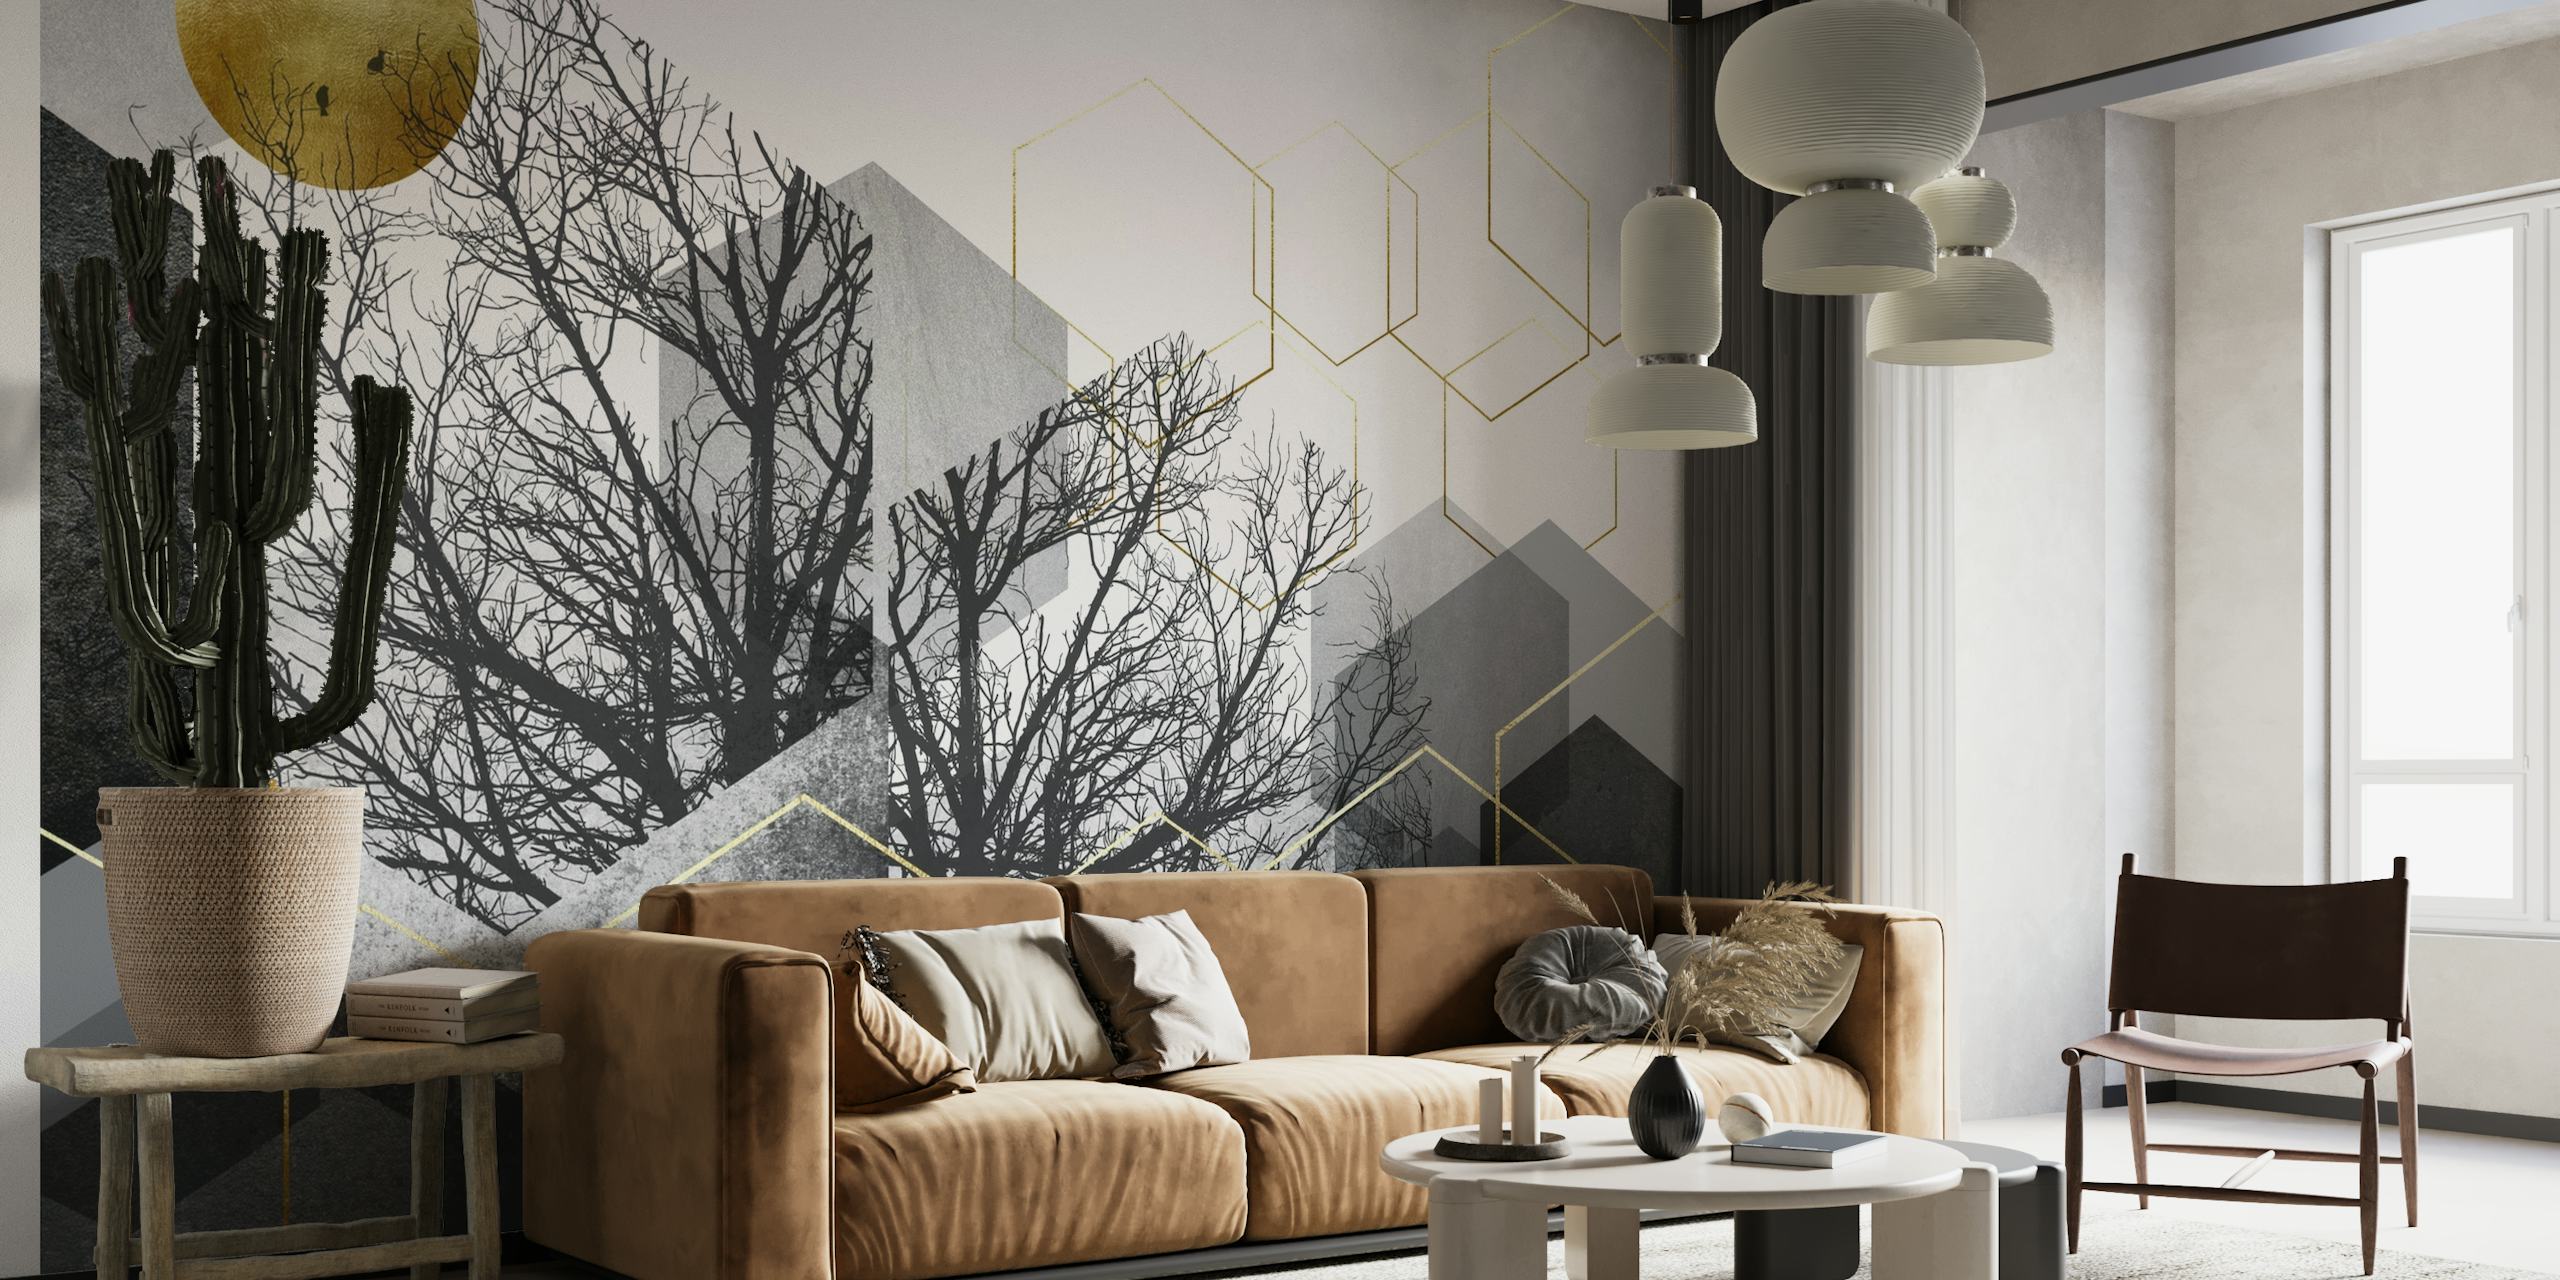 Abstract Geo Landscape wall mural with monochrome cubes, leafless trees, and a touch of gold